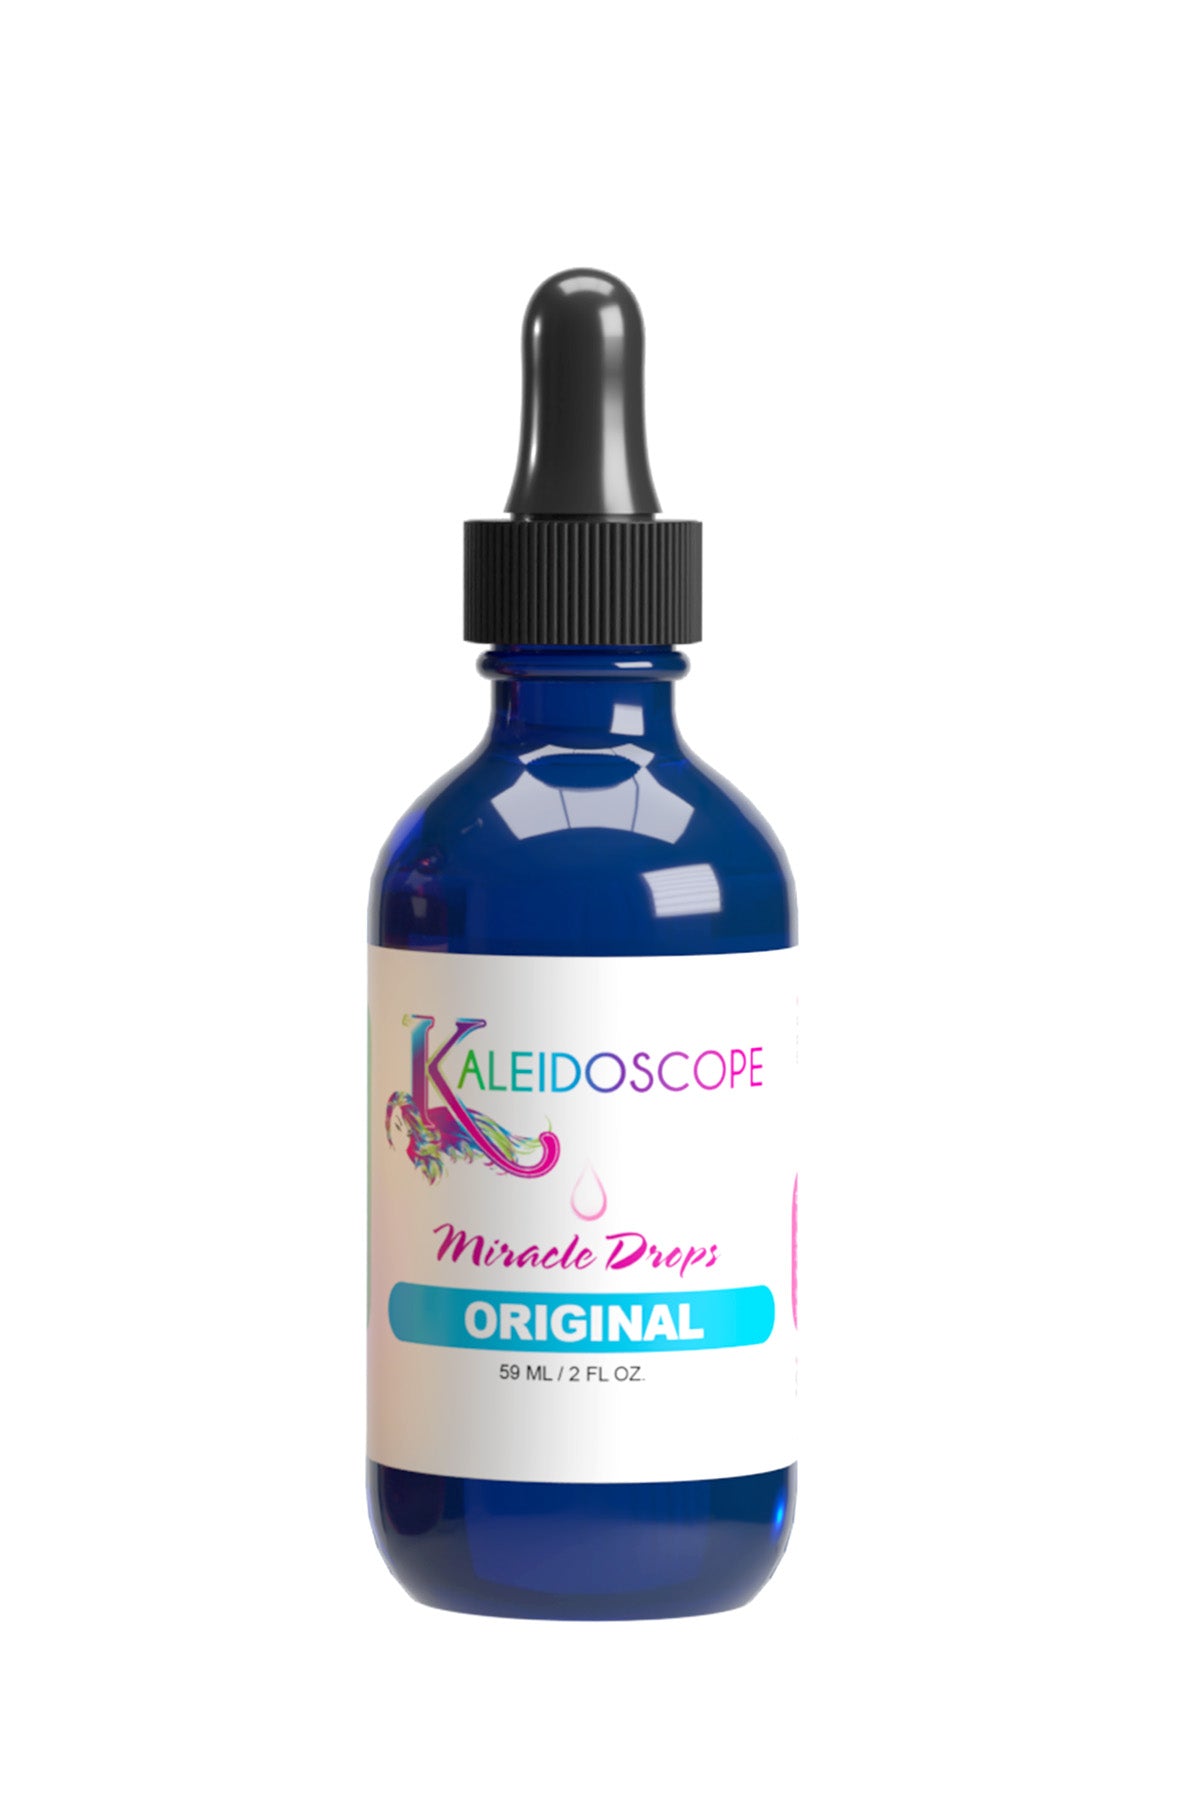 Kaleidoscope Miracle Drops Hair Growth Oil